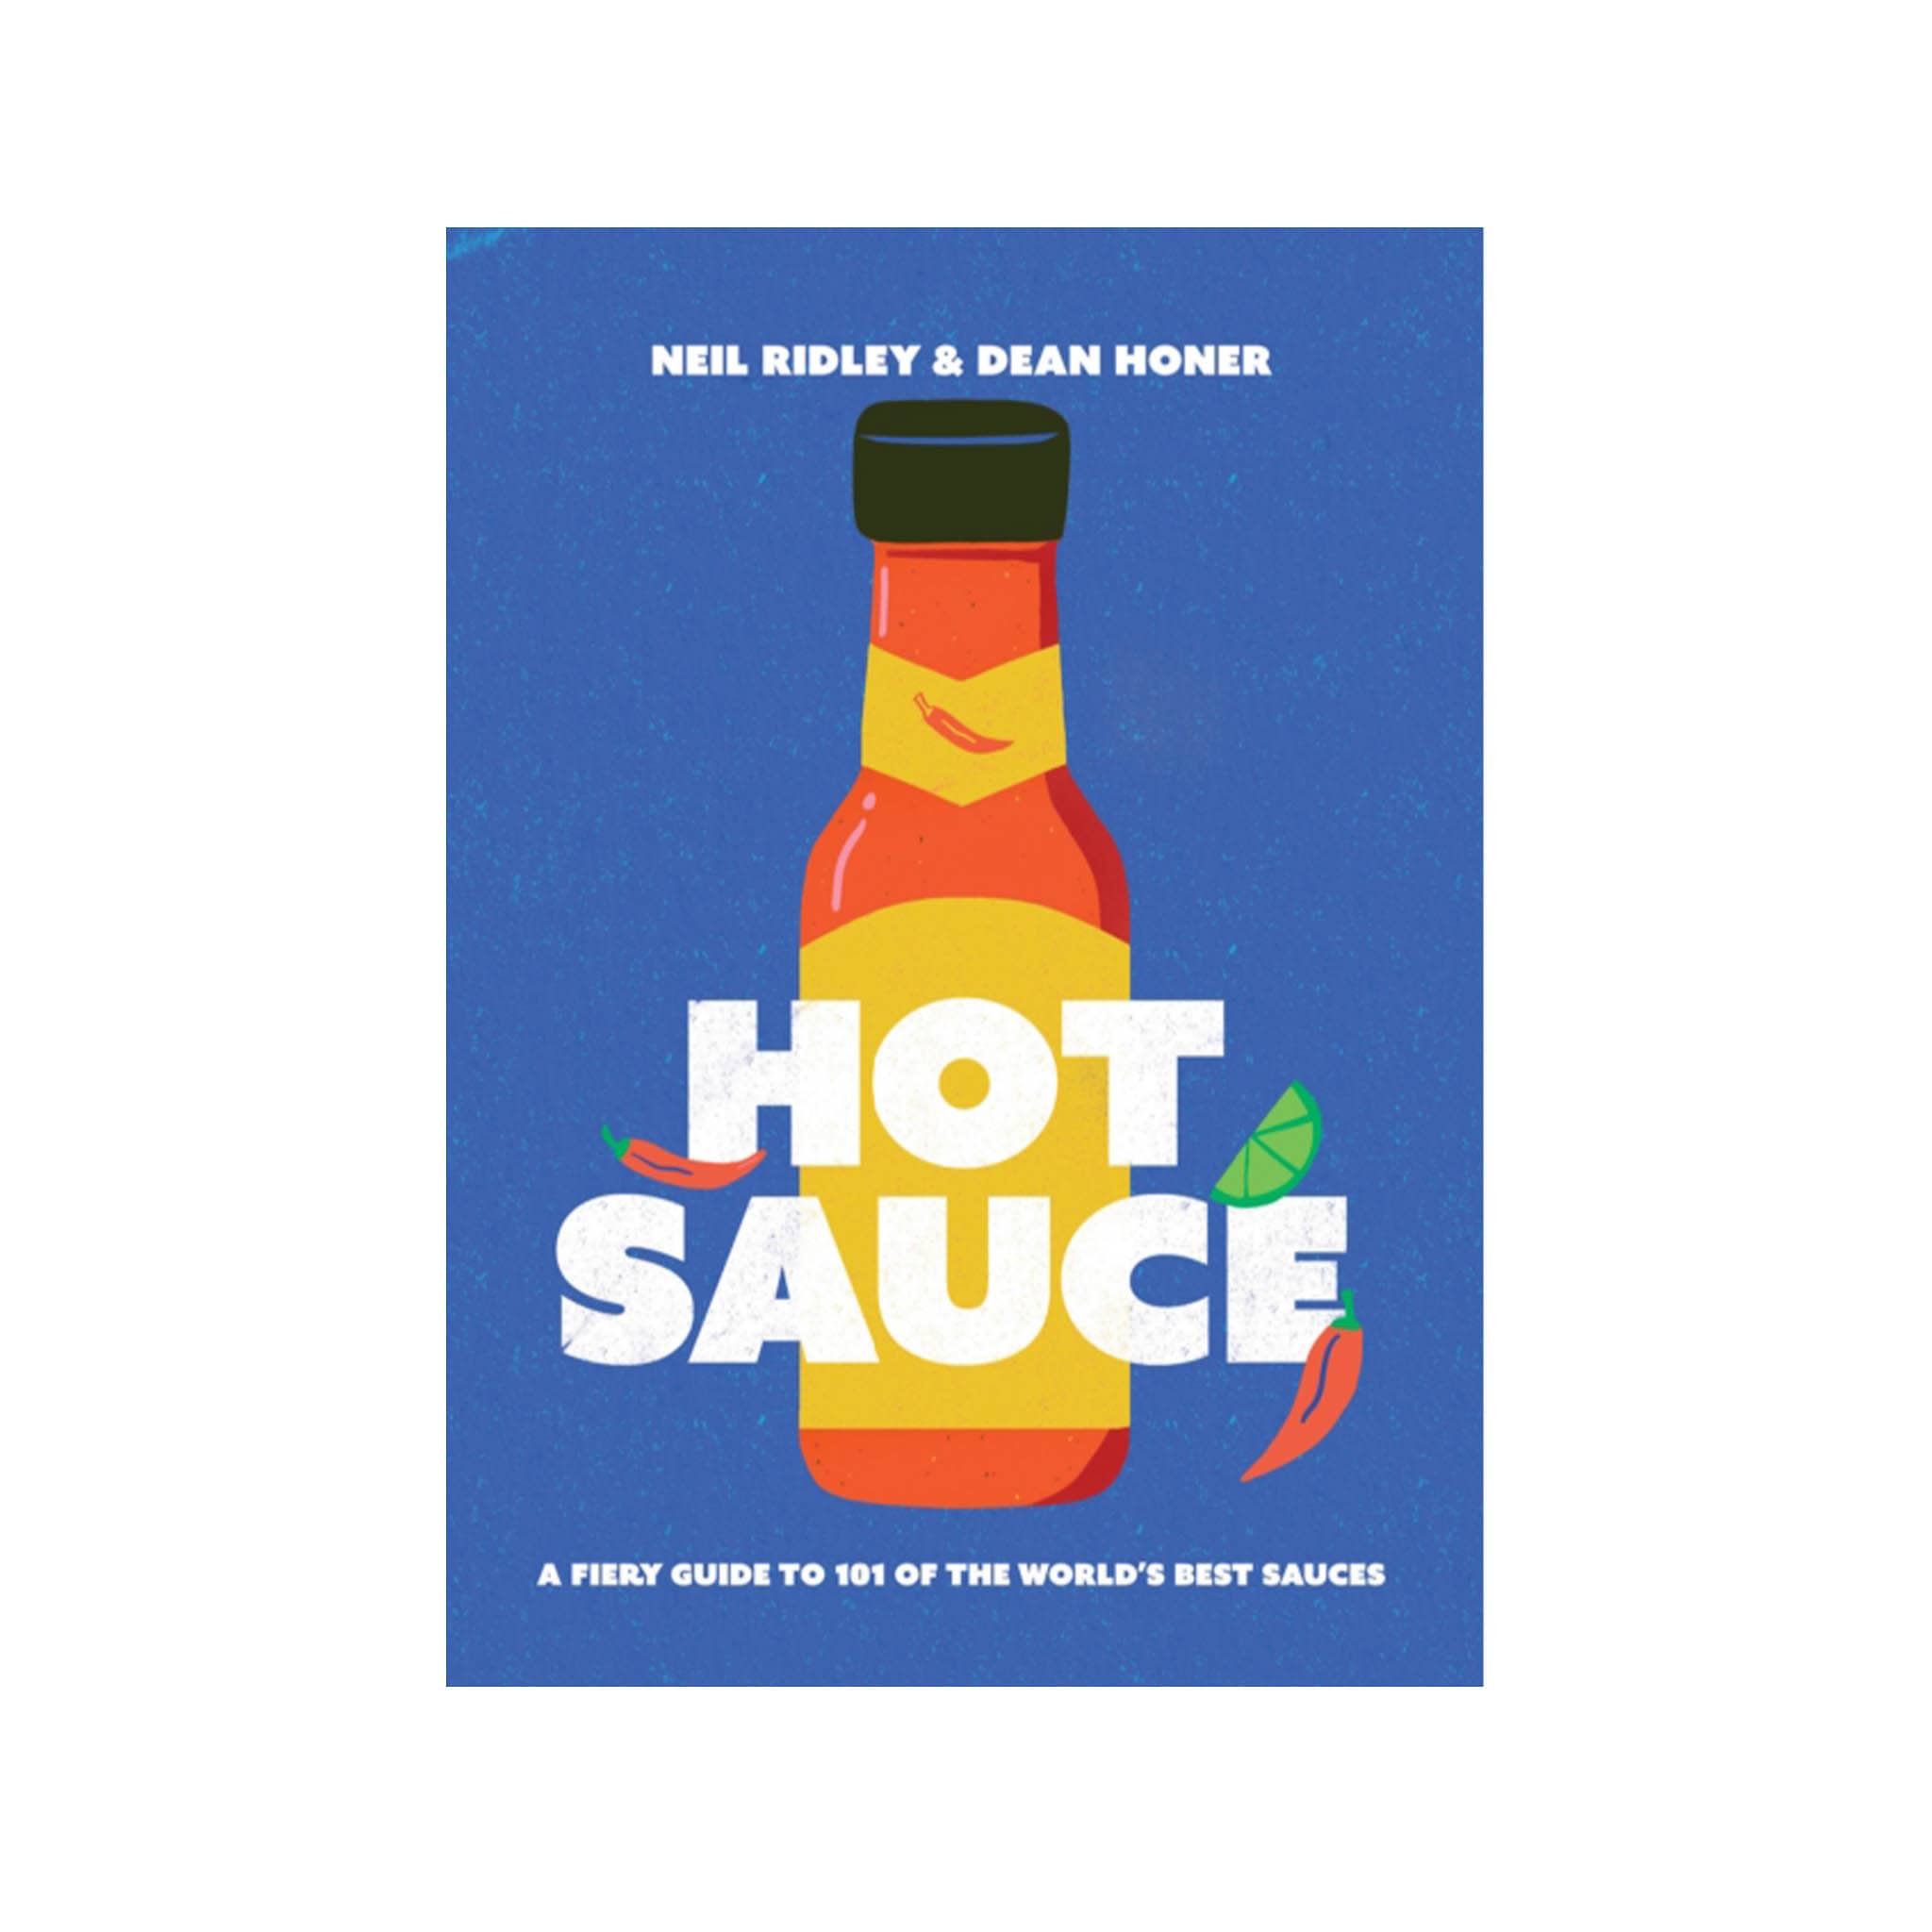 Hot Sauce, by Neil Ridley